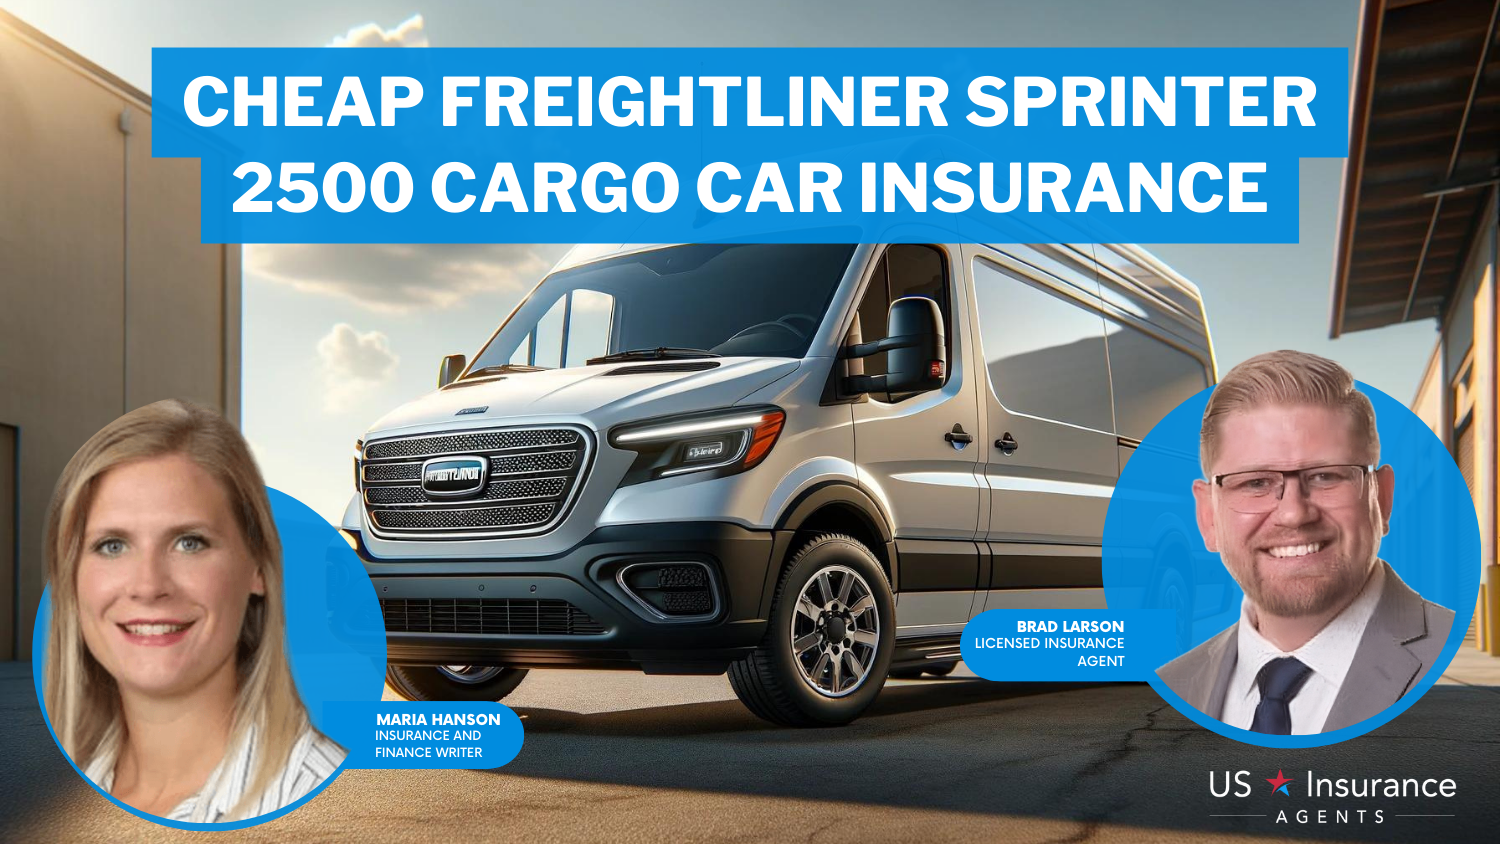 Cheap Freightliner Sprinter 2500 Cargo Car Insurance: Erie, Farmers, and Travelers